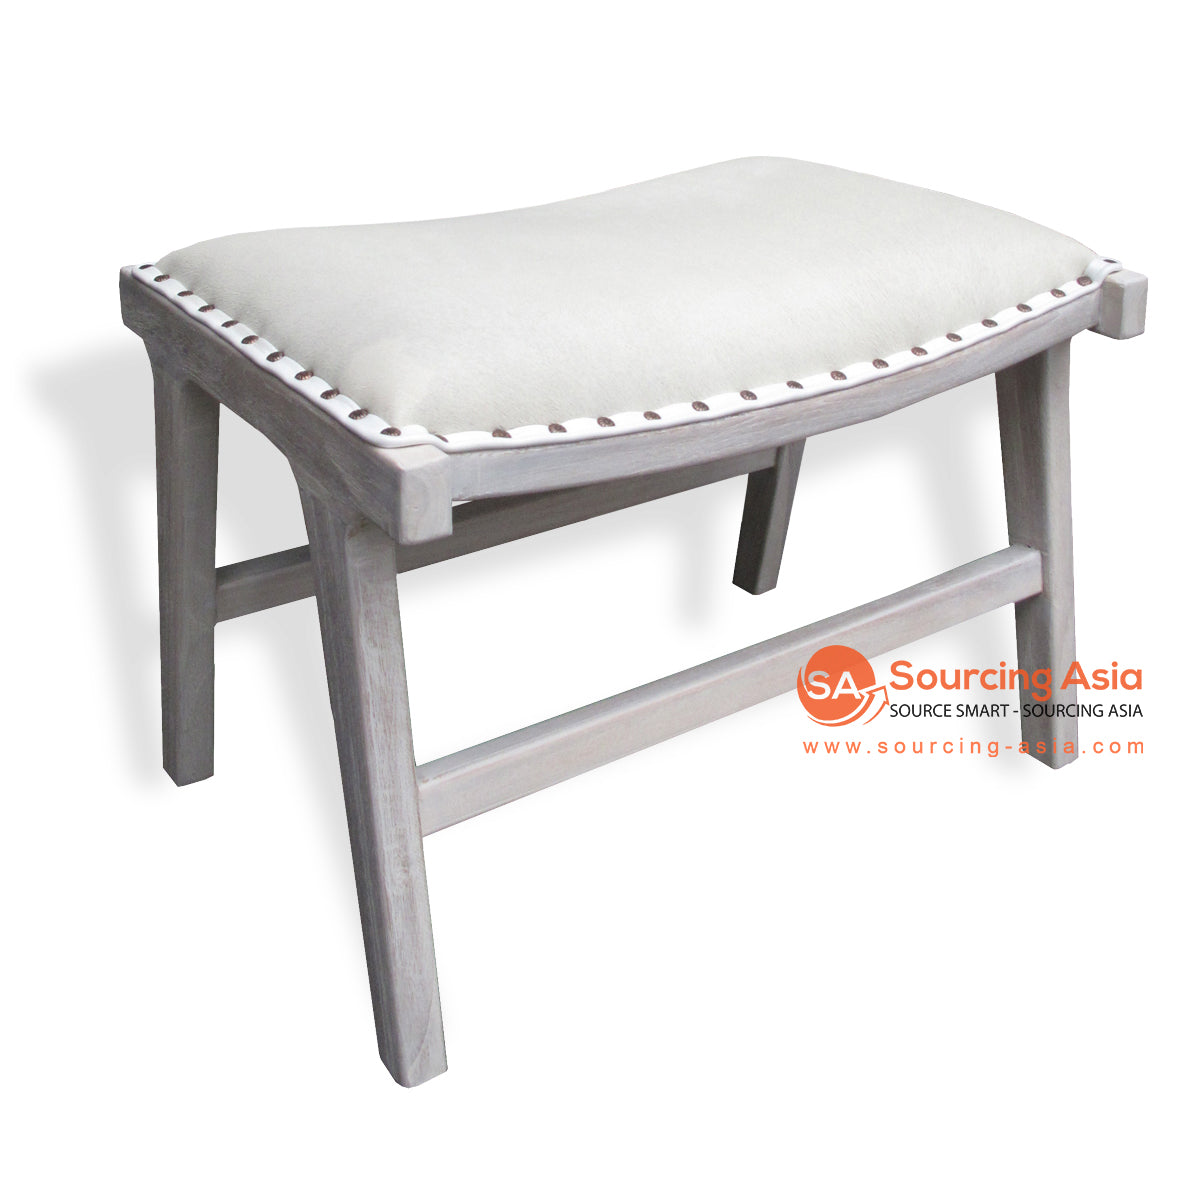 KUSJ002S WHITE WASH TEAK WOOD STOOL WITH LEATHER COW HIDE SEAT